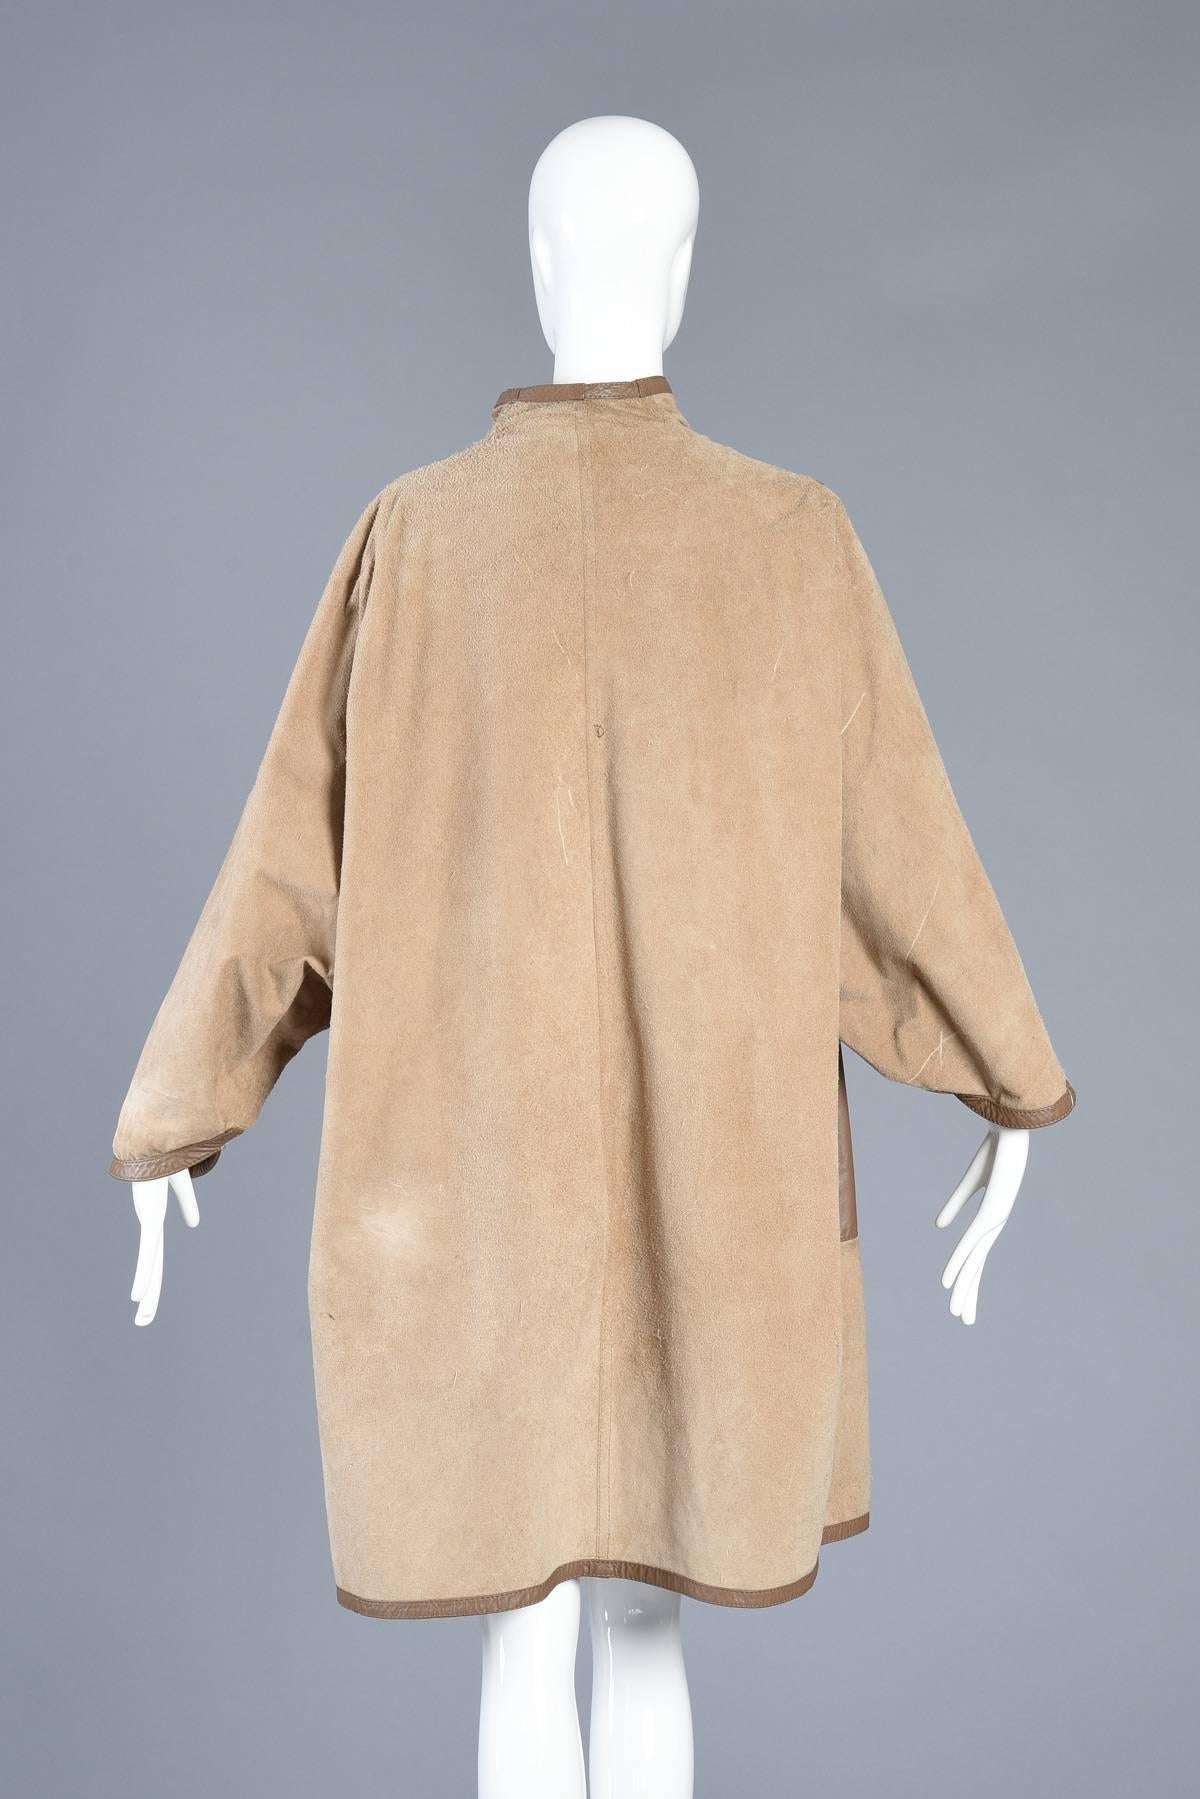 Incredible 1980s Reversible Suede Leather Avant Garde Draped Cape For Sale 1